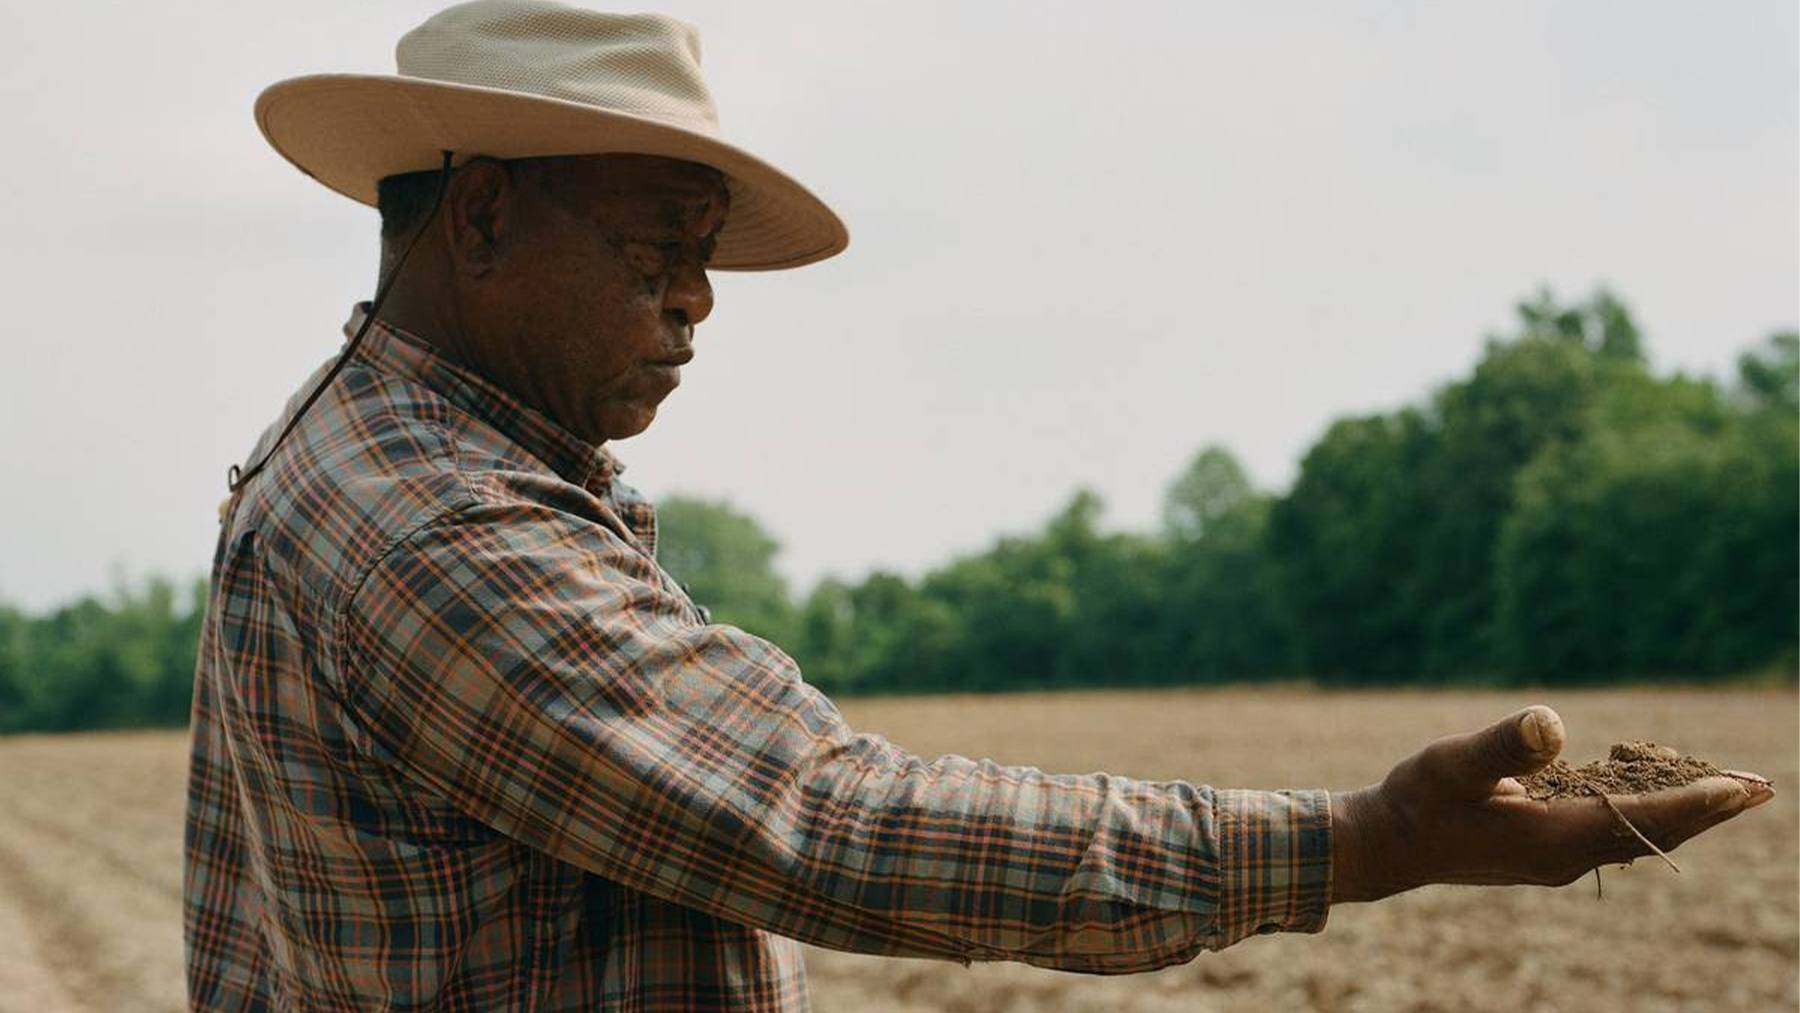 A farmer holds soil in his raised hand to the right of the image.